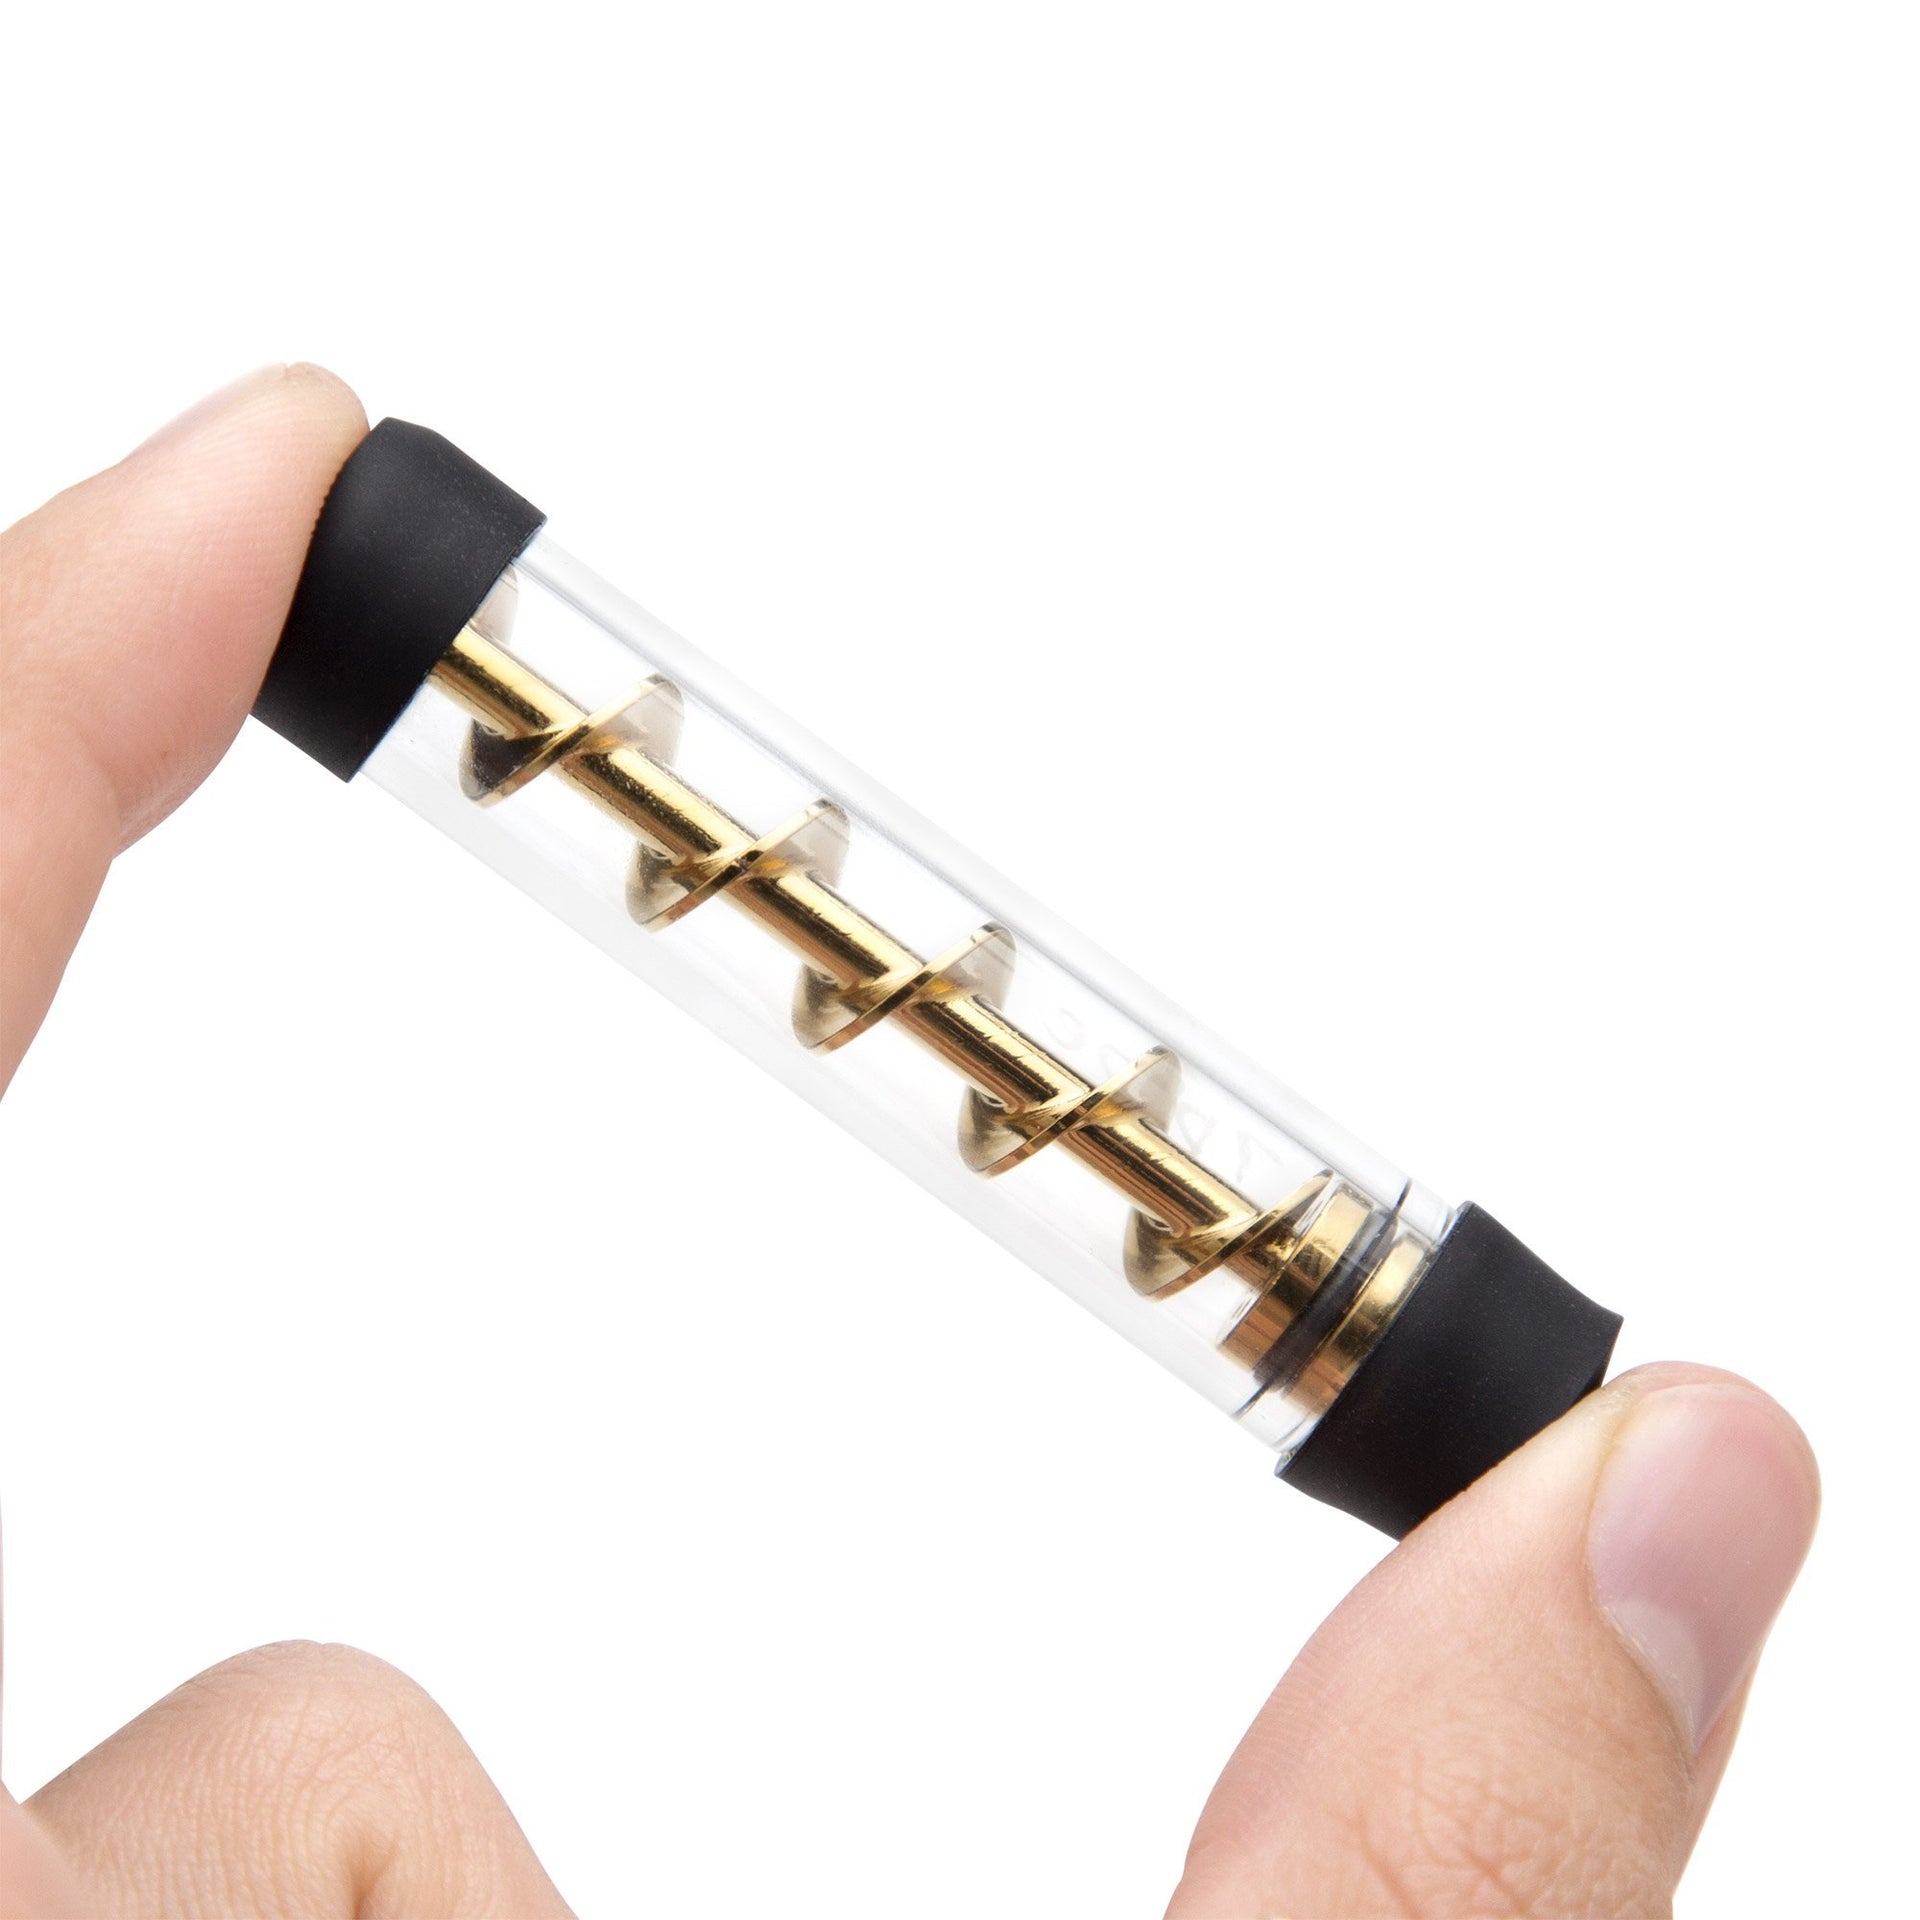 hot selling product v12 mini round mouth twisty glass blunt